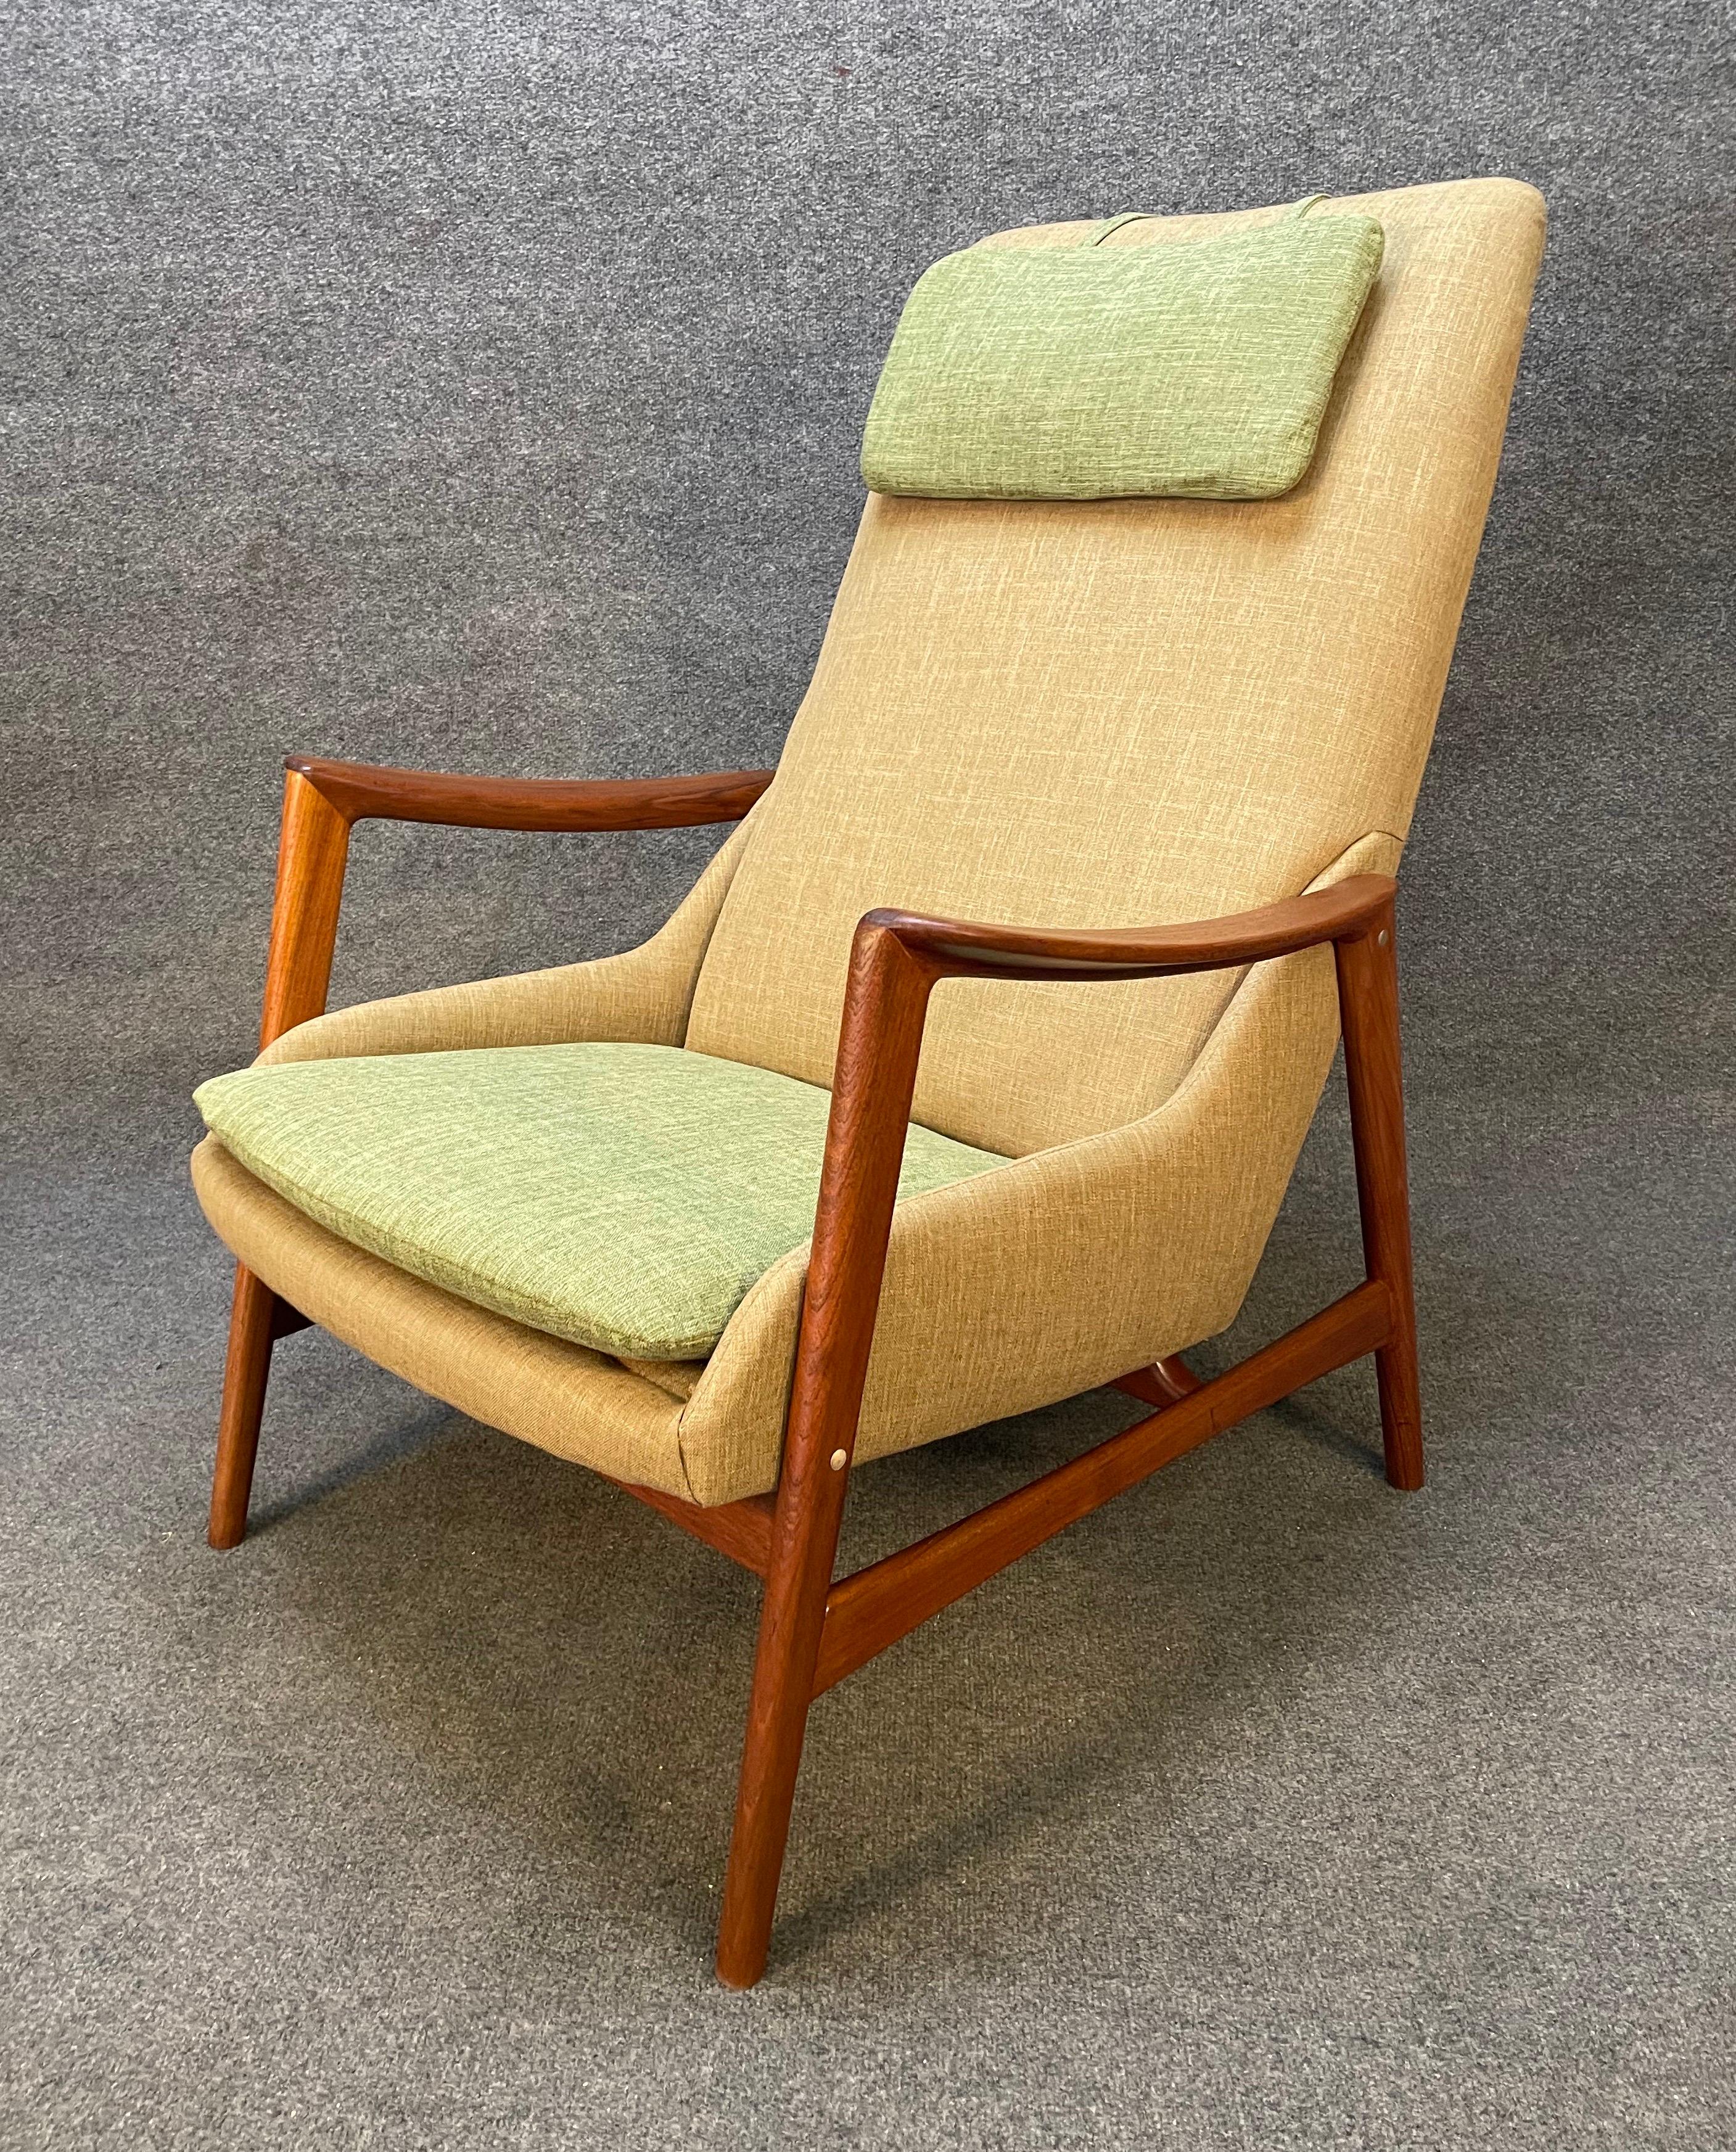 Here is a rare and beautiful Scandinavian modern easy chair in teak manufactured by Dux in Sweden in the 1960's.
This comfortable lounge chair, recently imported from Europe to California before its restoration, features a solid teak frame with